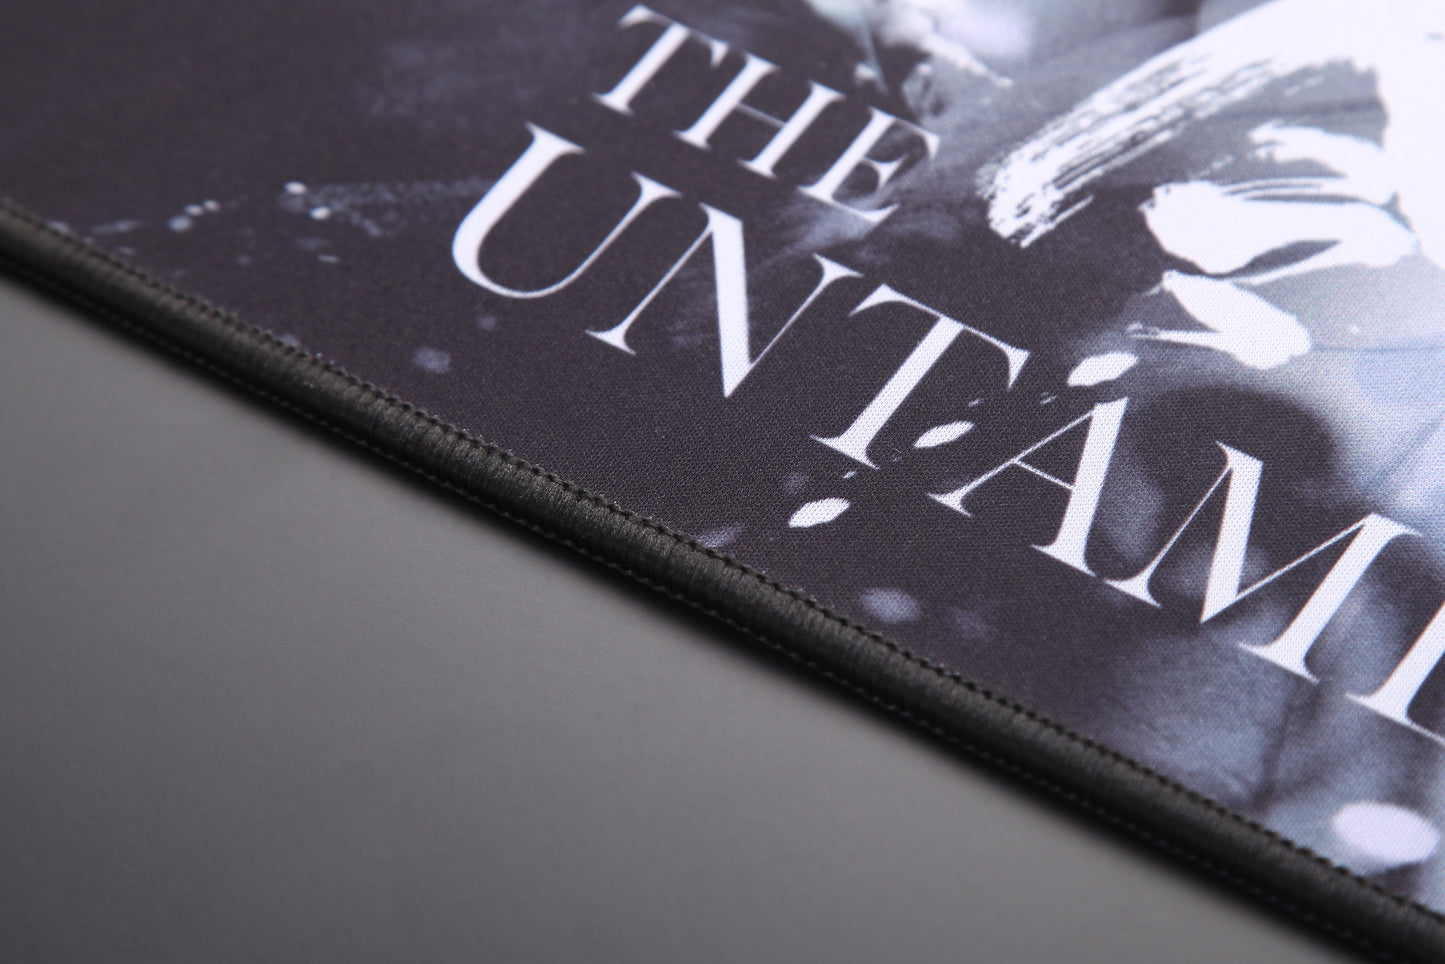 The Untamed One Year Anniversary Series  The Untamed Desk Pad／Mouse Pad